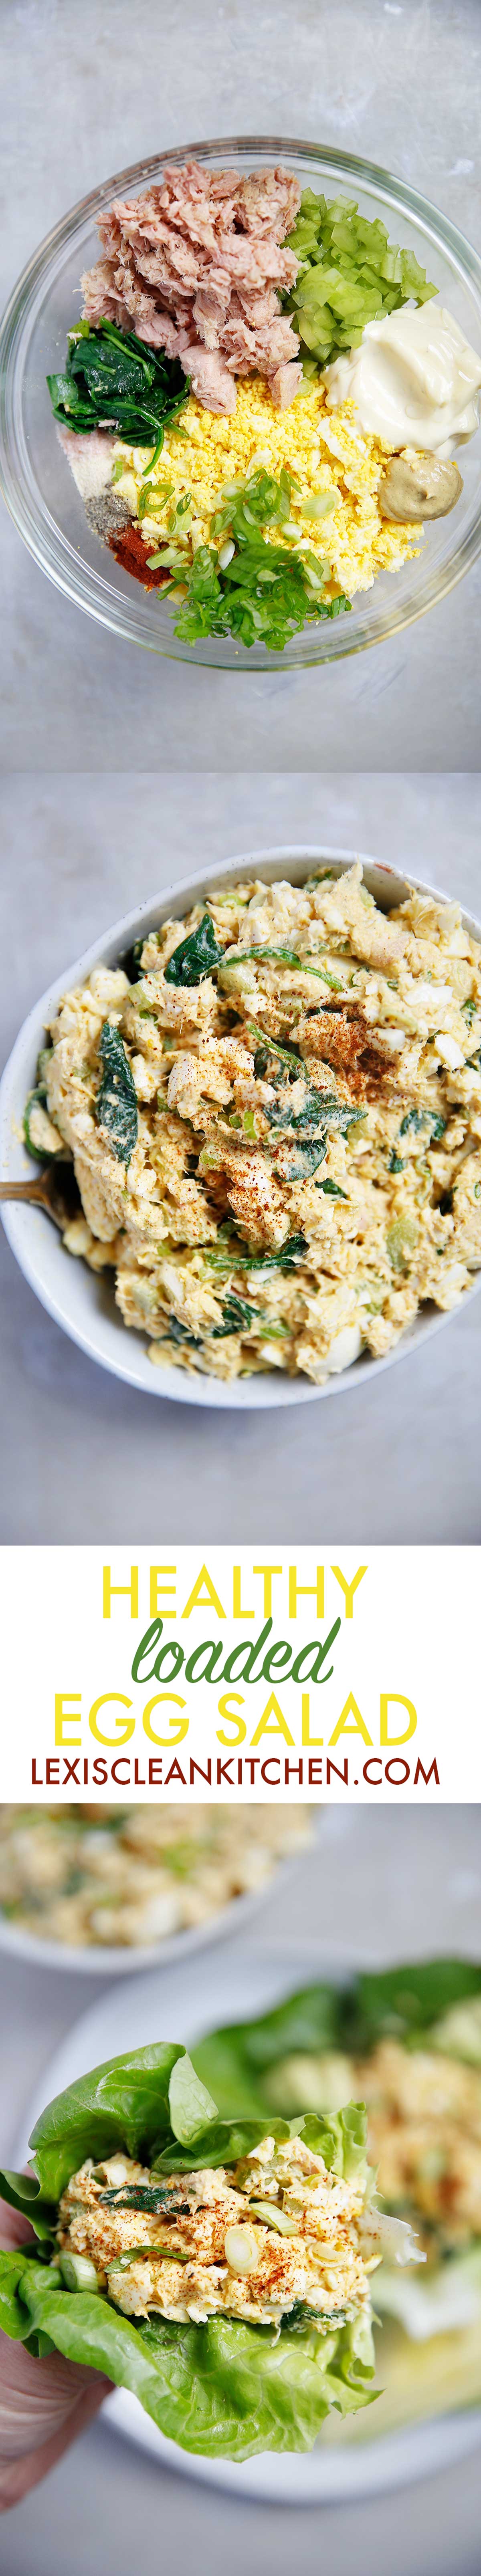 Loaded Egg Salad with Tuna {Paleo-friendly, gluten-free, grain-free, dairy-free, and low-carb} | Lexi's Clean Kitchen